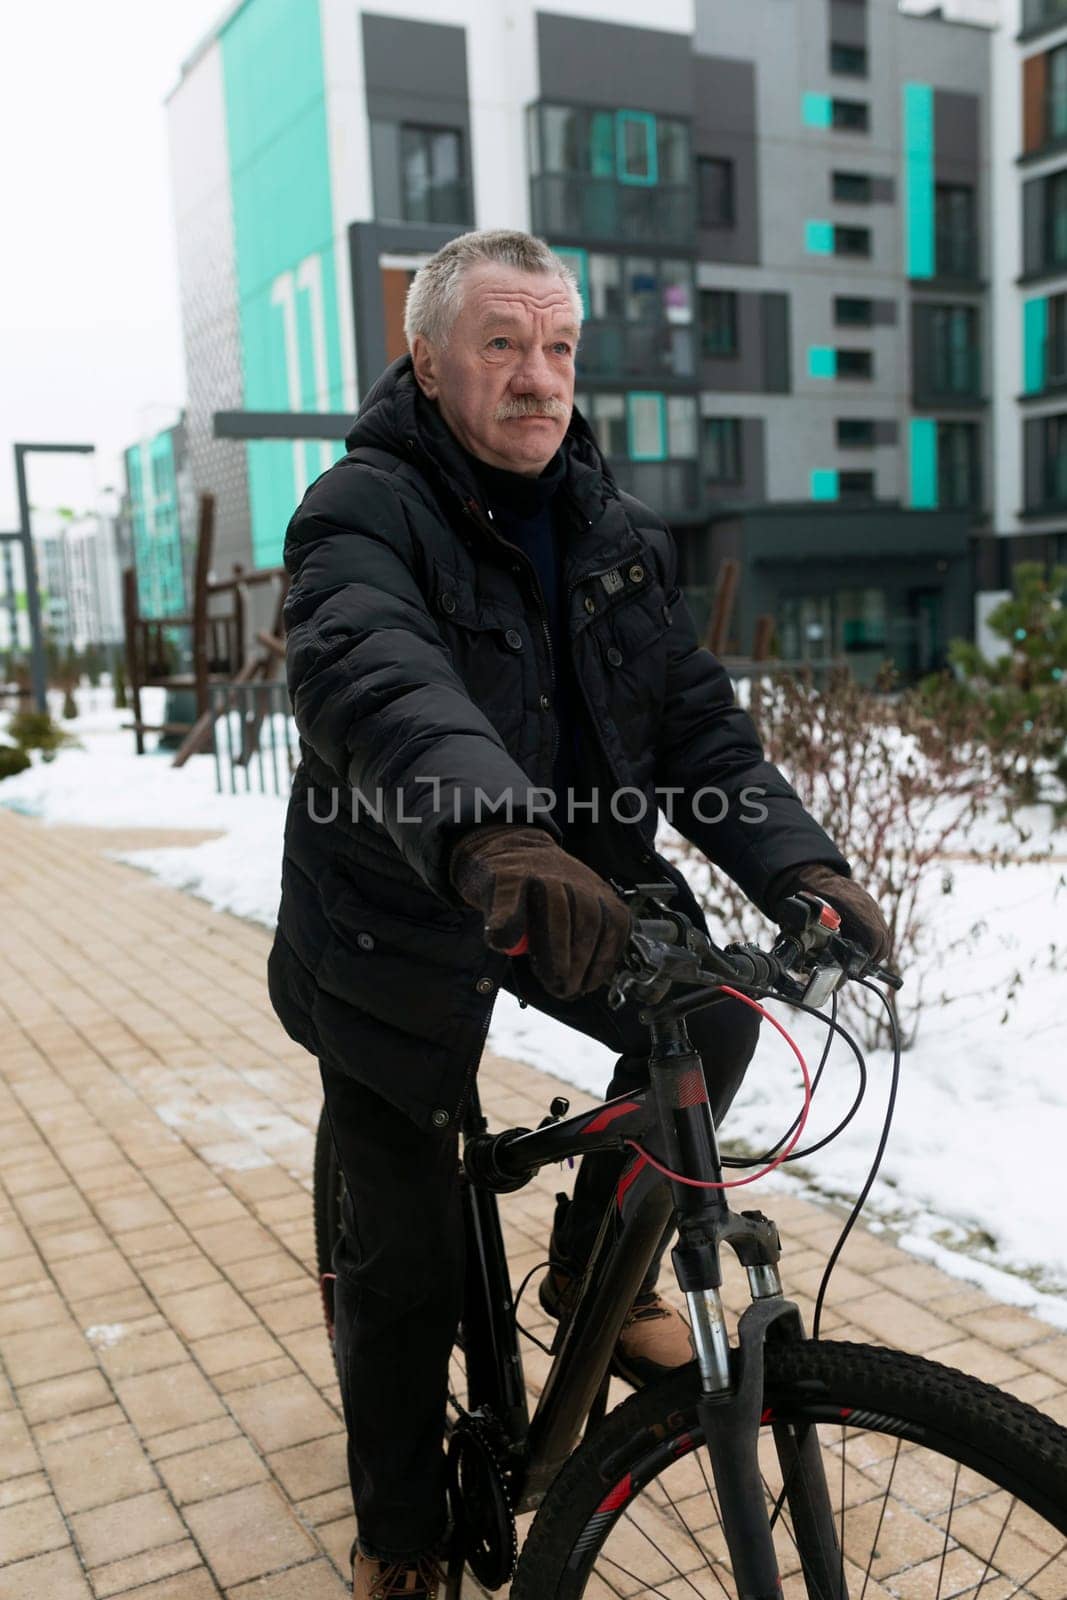 European elderly man rents a bicycle to ride around the city.